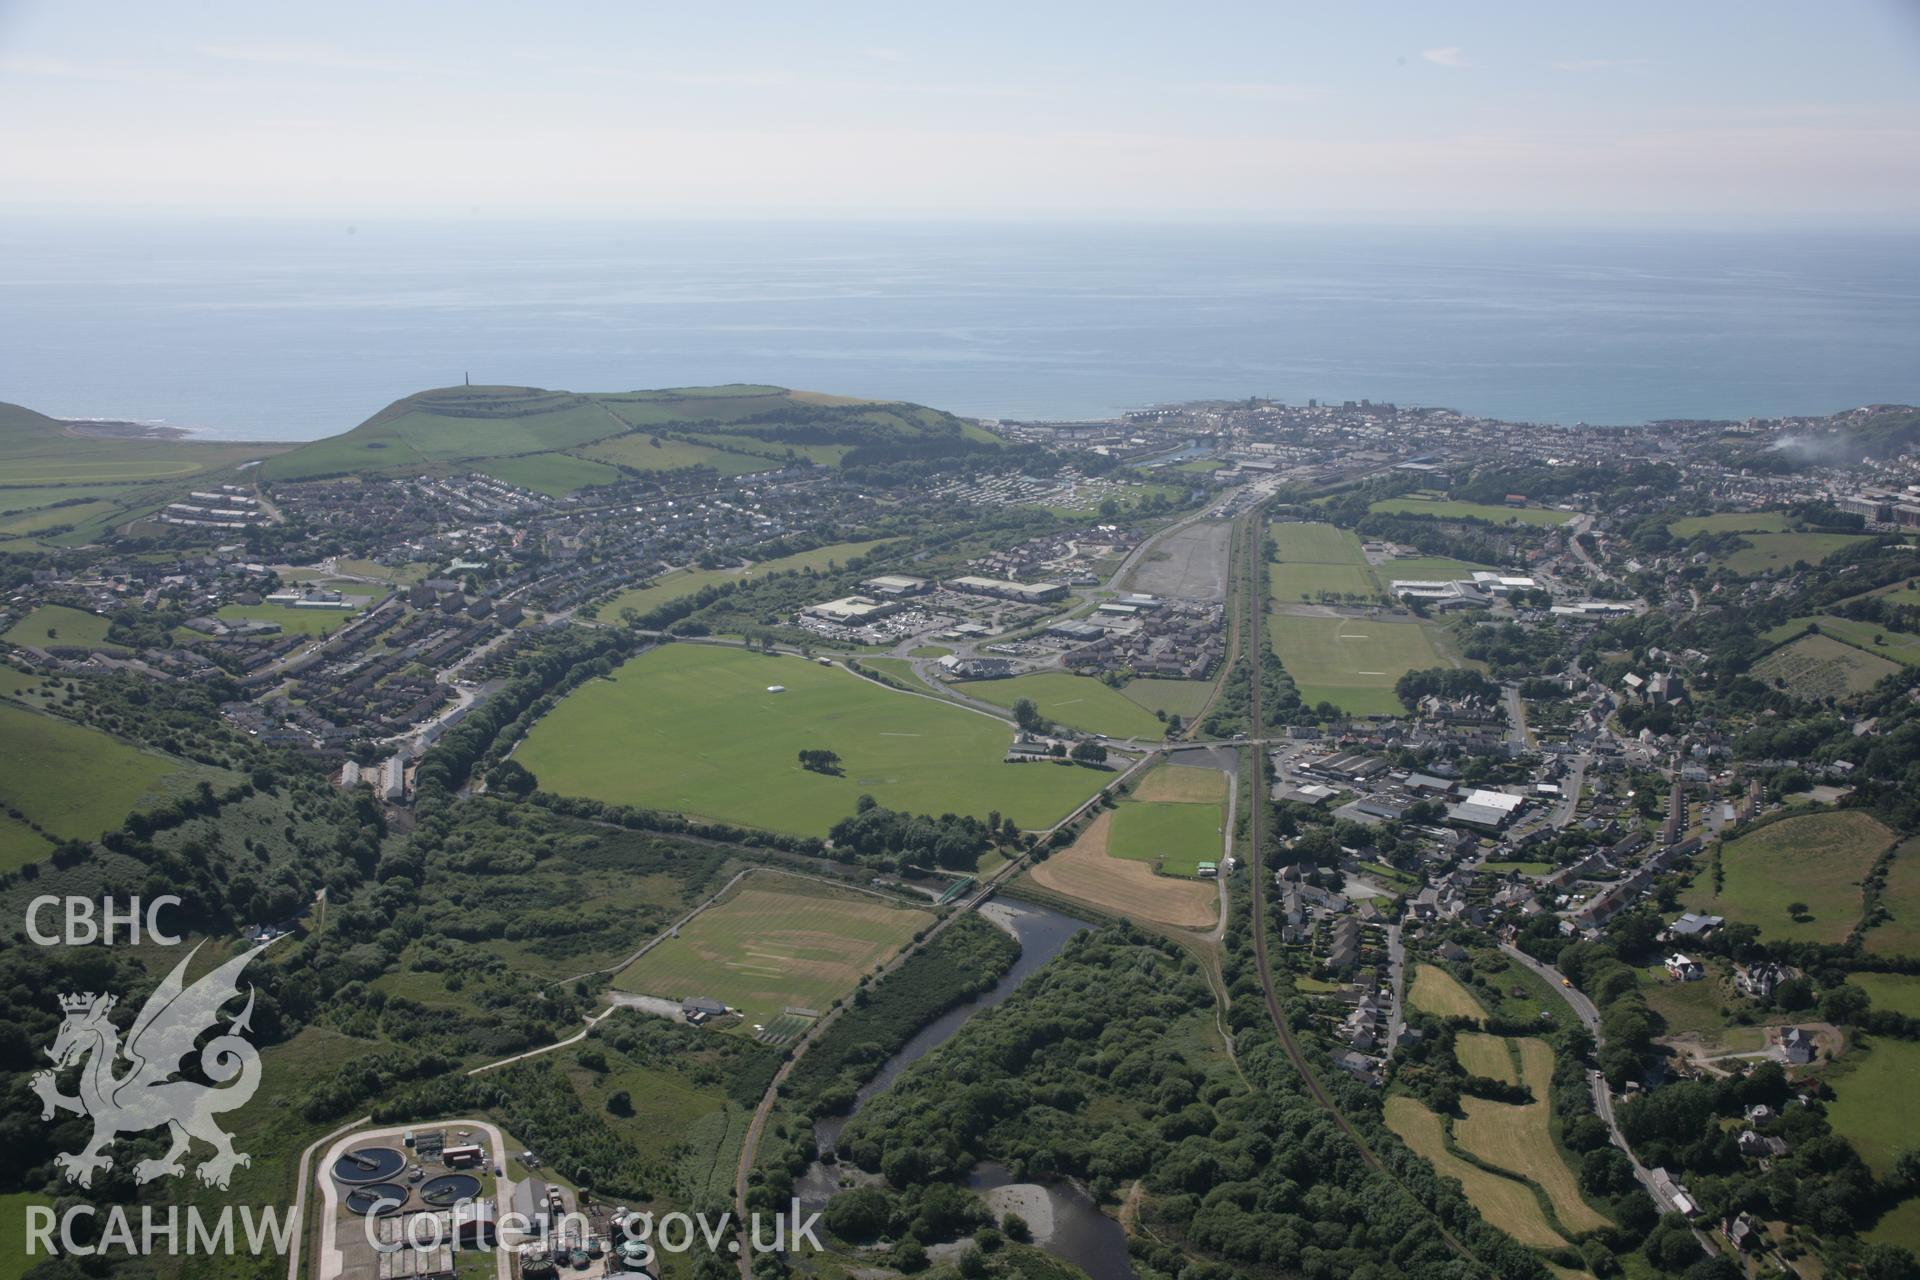 RCAHMW colour oblique aerial photograph of Aberystwyth. A wide viewfrom the east including Pen Dinas. Taken on 23 June 2005 by Toby Driver